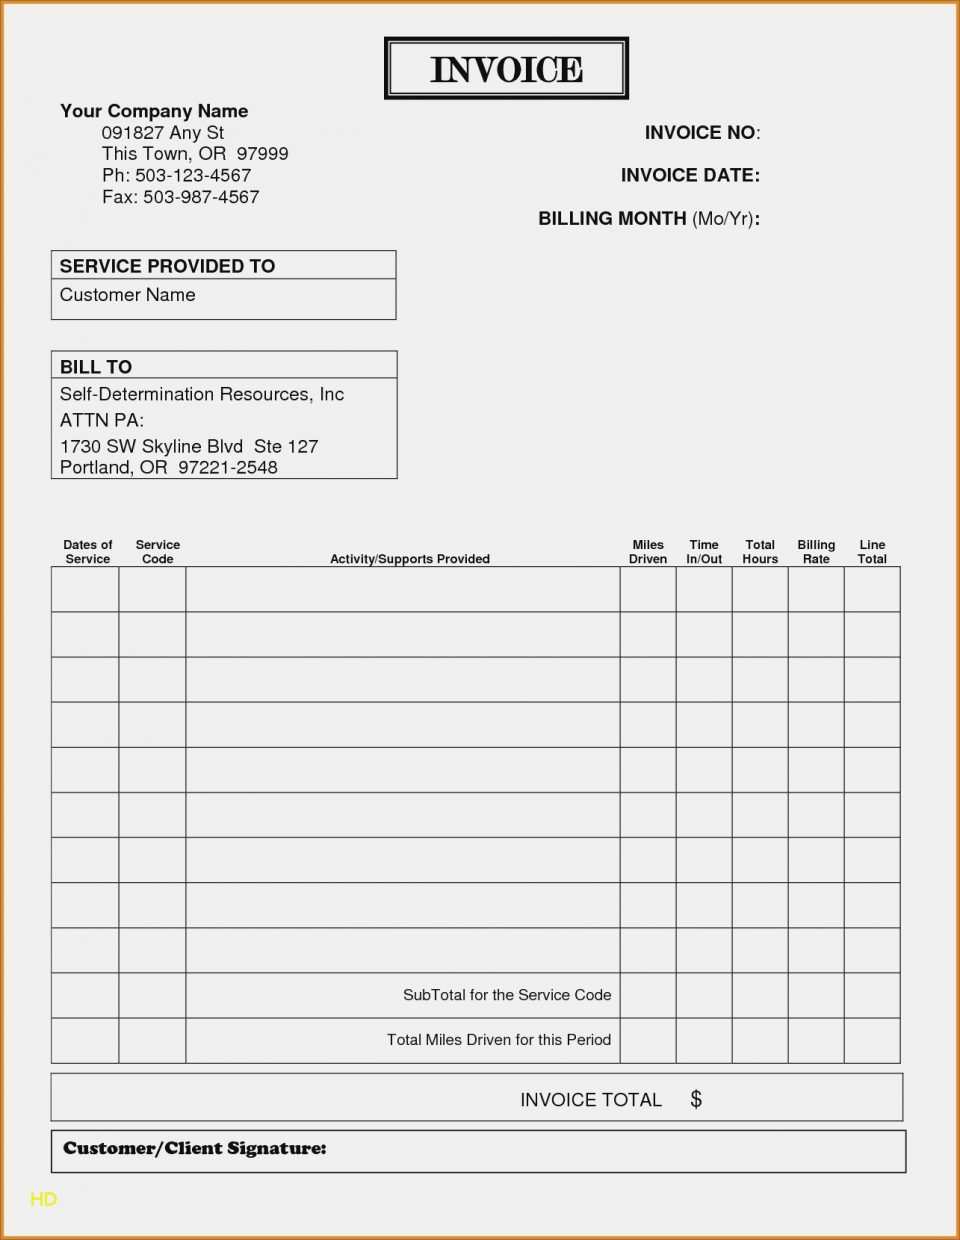 48 Lawn Care Invoice Template Pdf For Free By Lawn Care Invoice Template Pdf Cards Design Templates